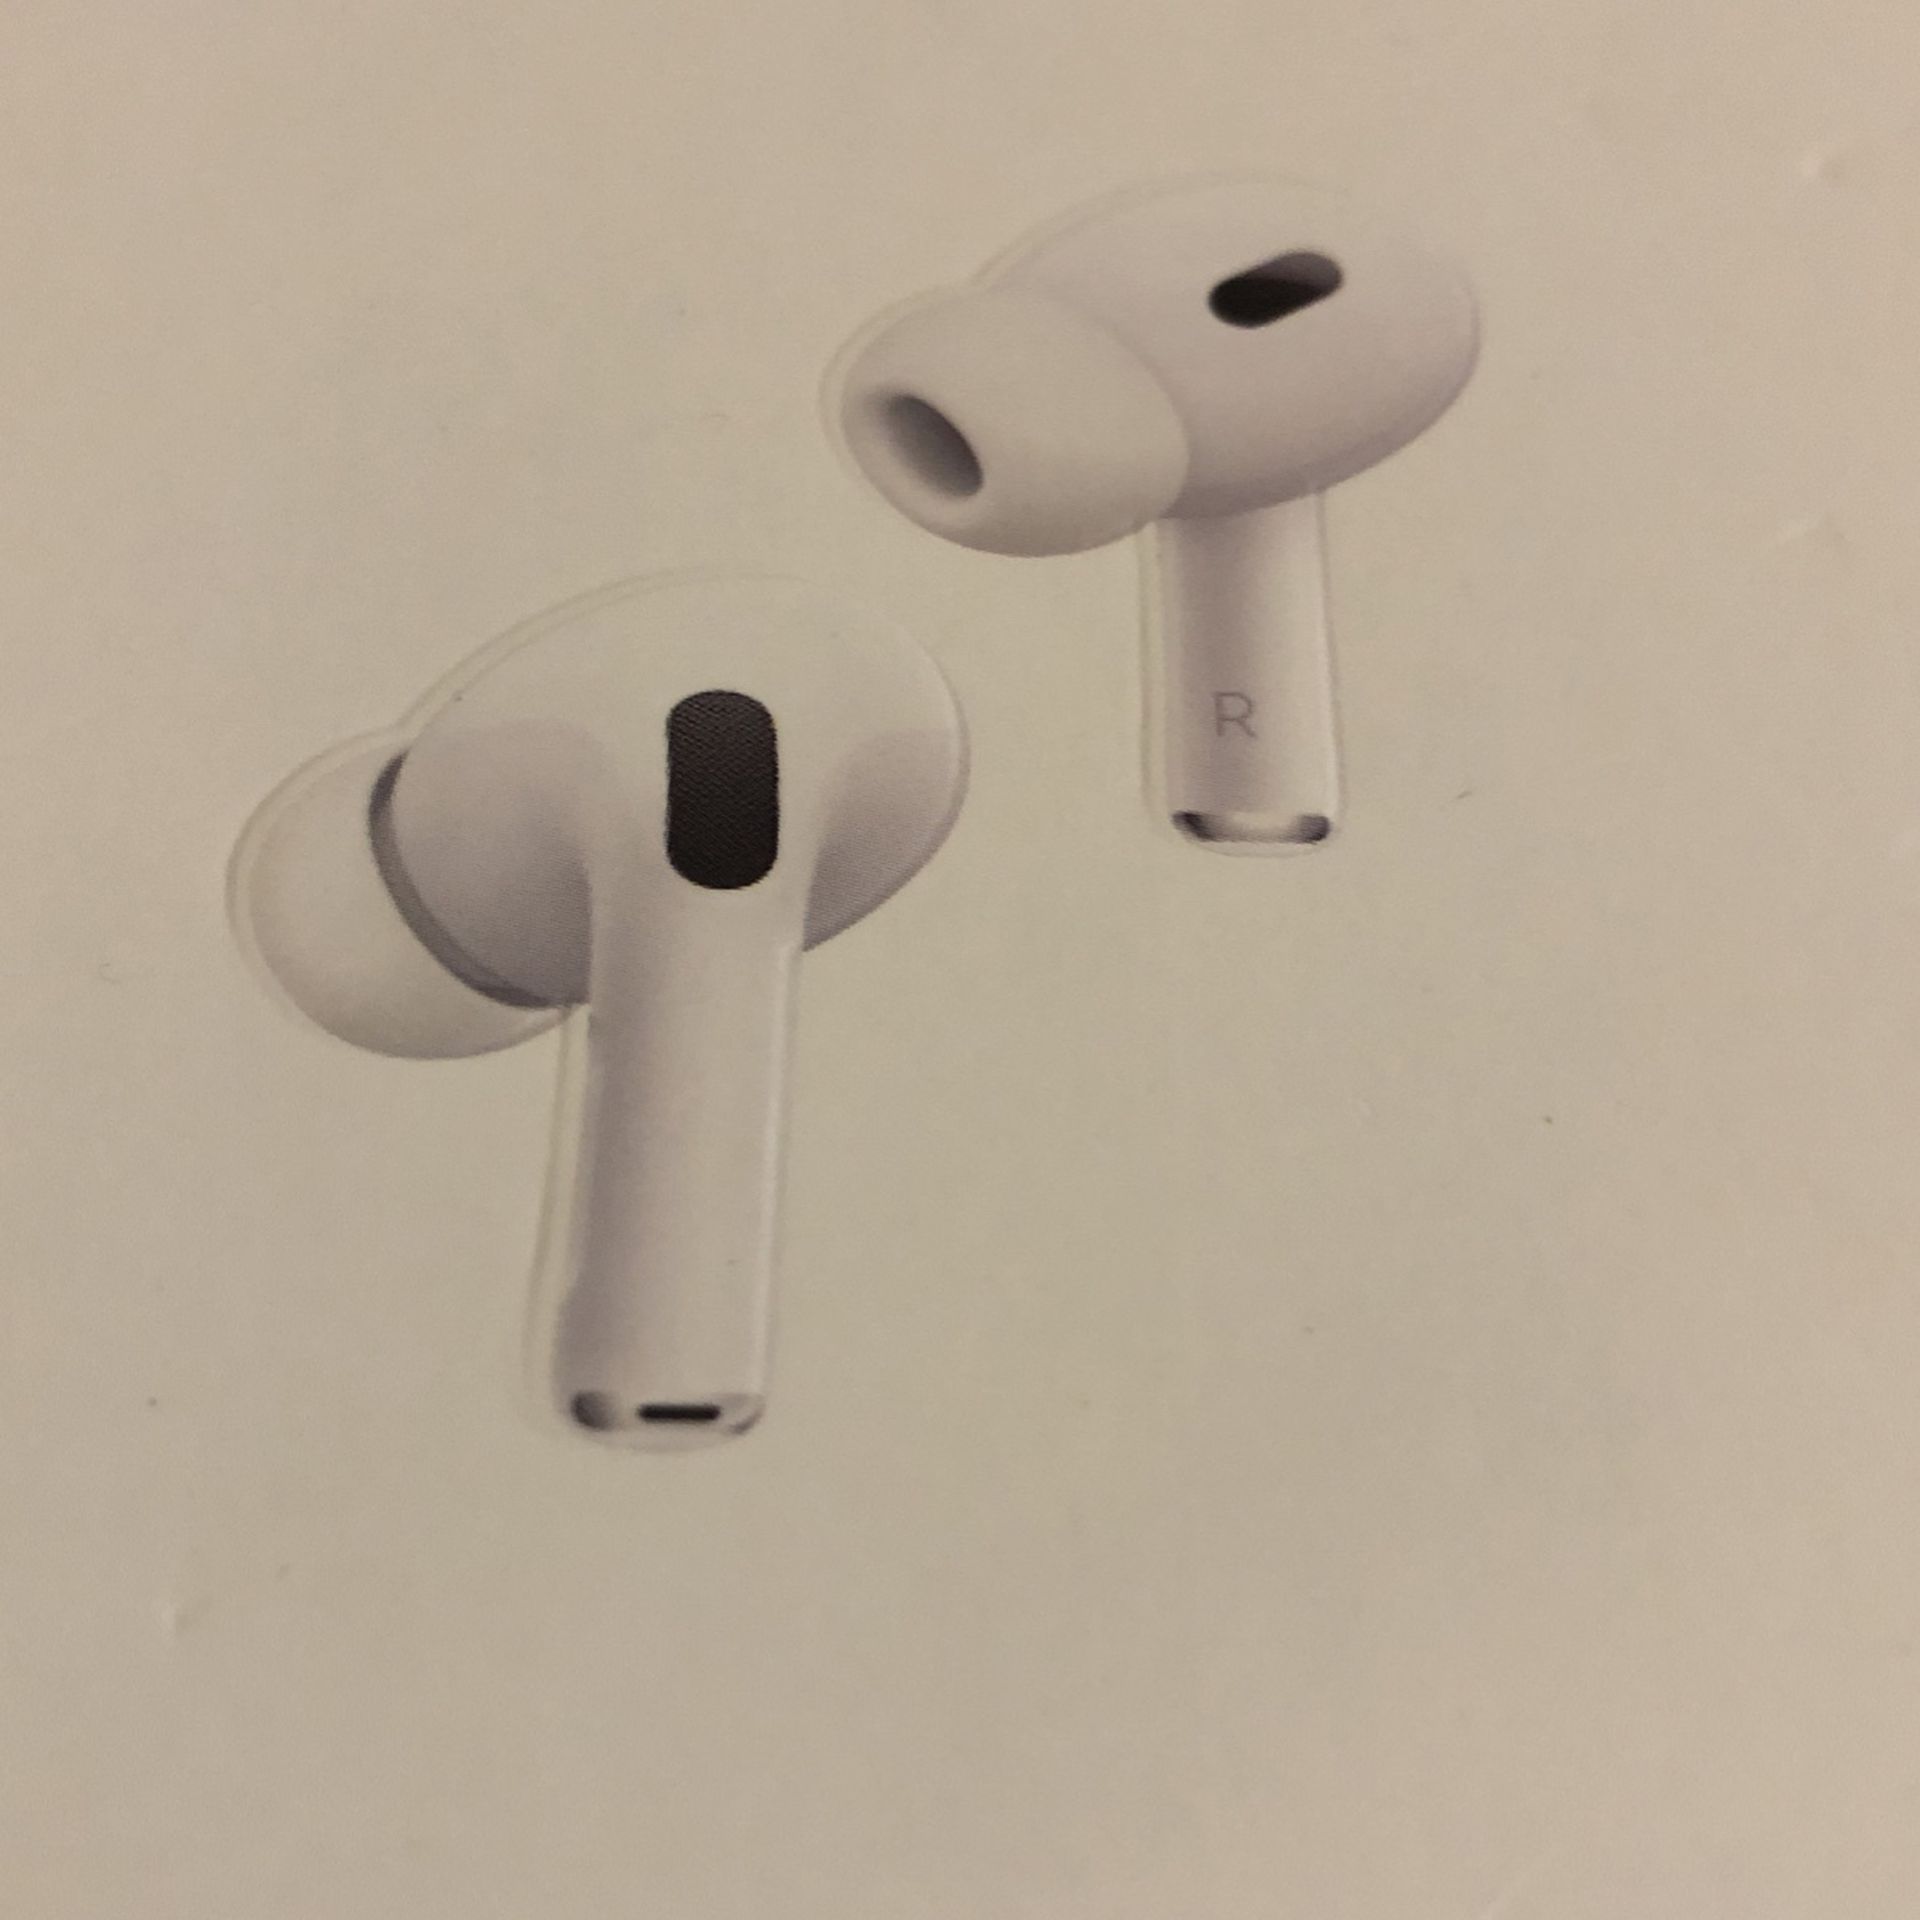 Mother’s Day Hot Sale 2 AirPods Pro For 140 